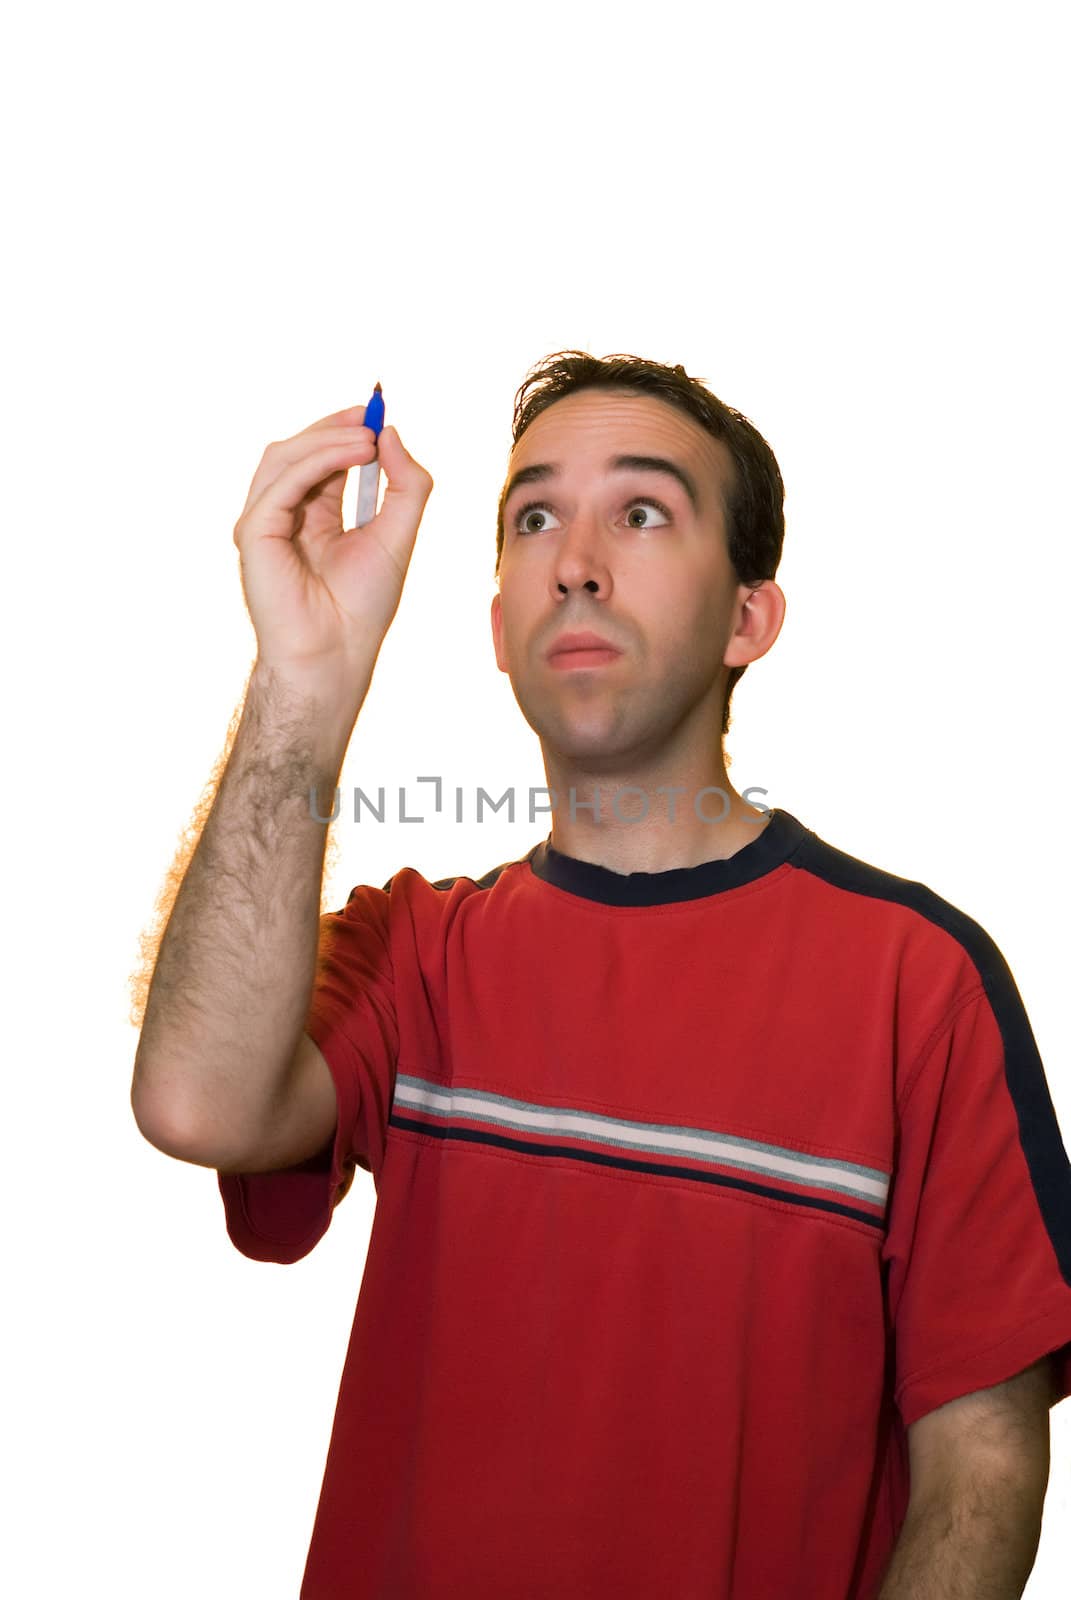 A young man wearing a red shirt, writing your text on a piece of glass in front of him